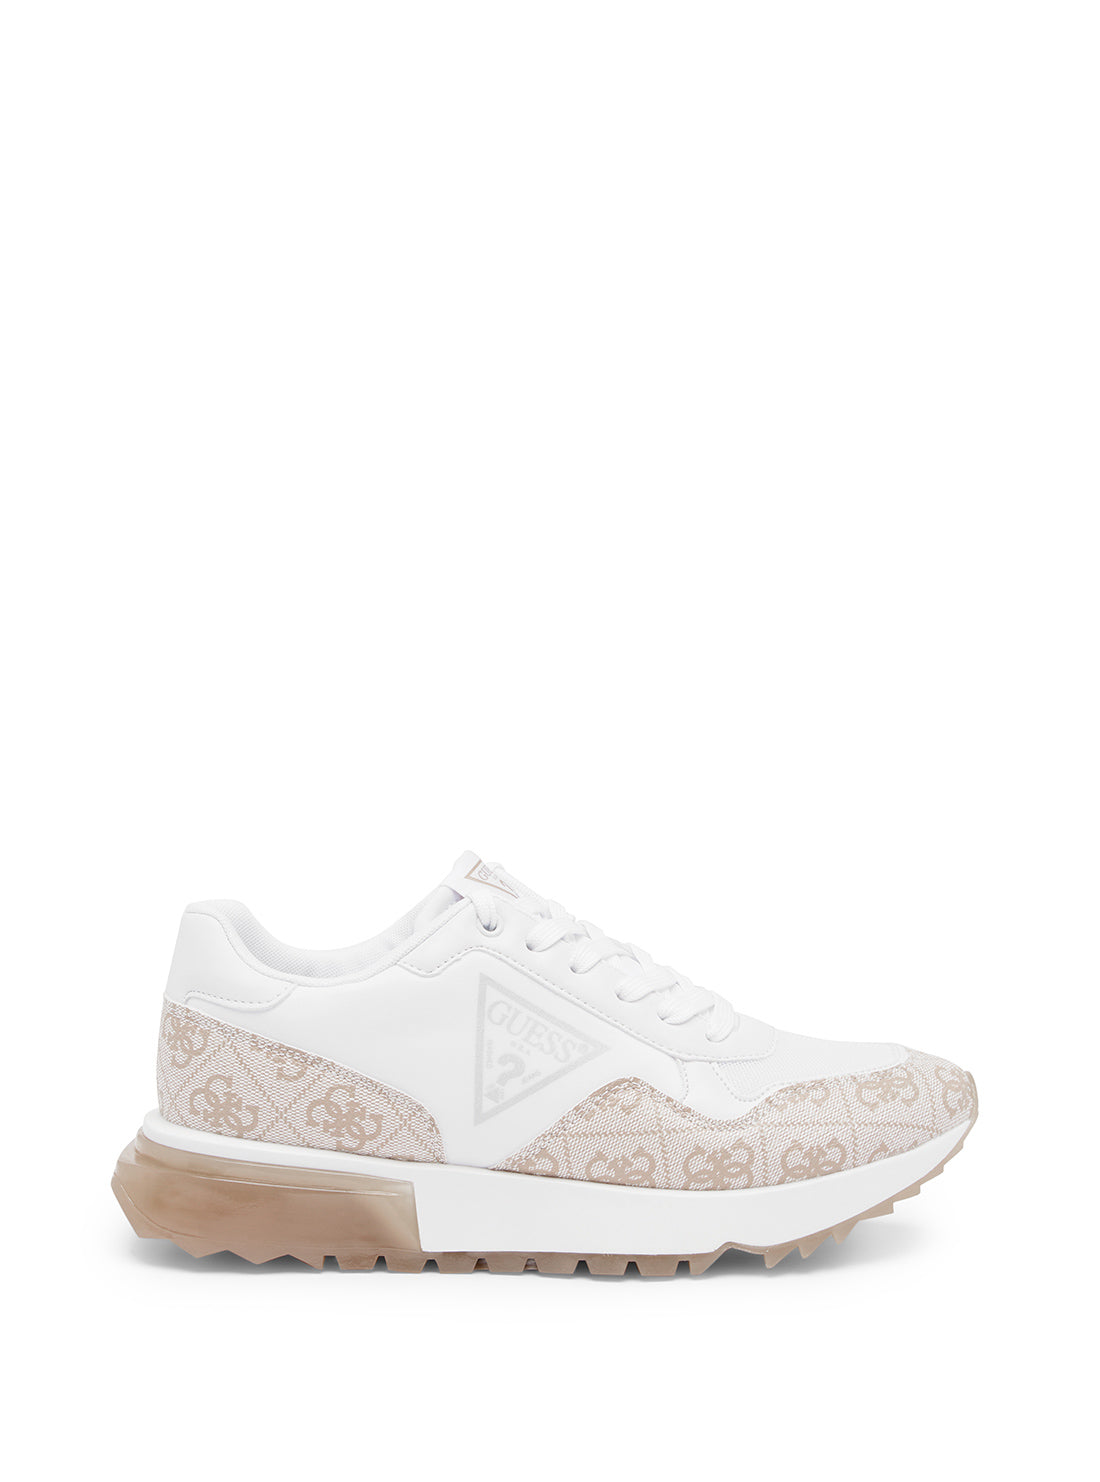 White and Taupe Melany Logo Sneakers | GUESS Women's Shoes | side view